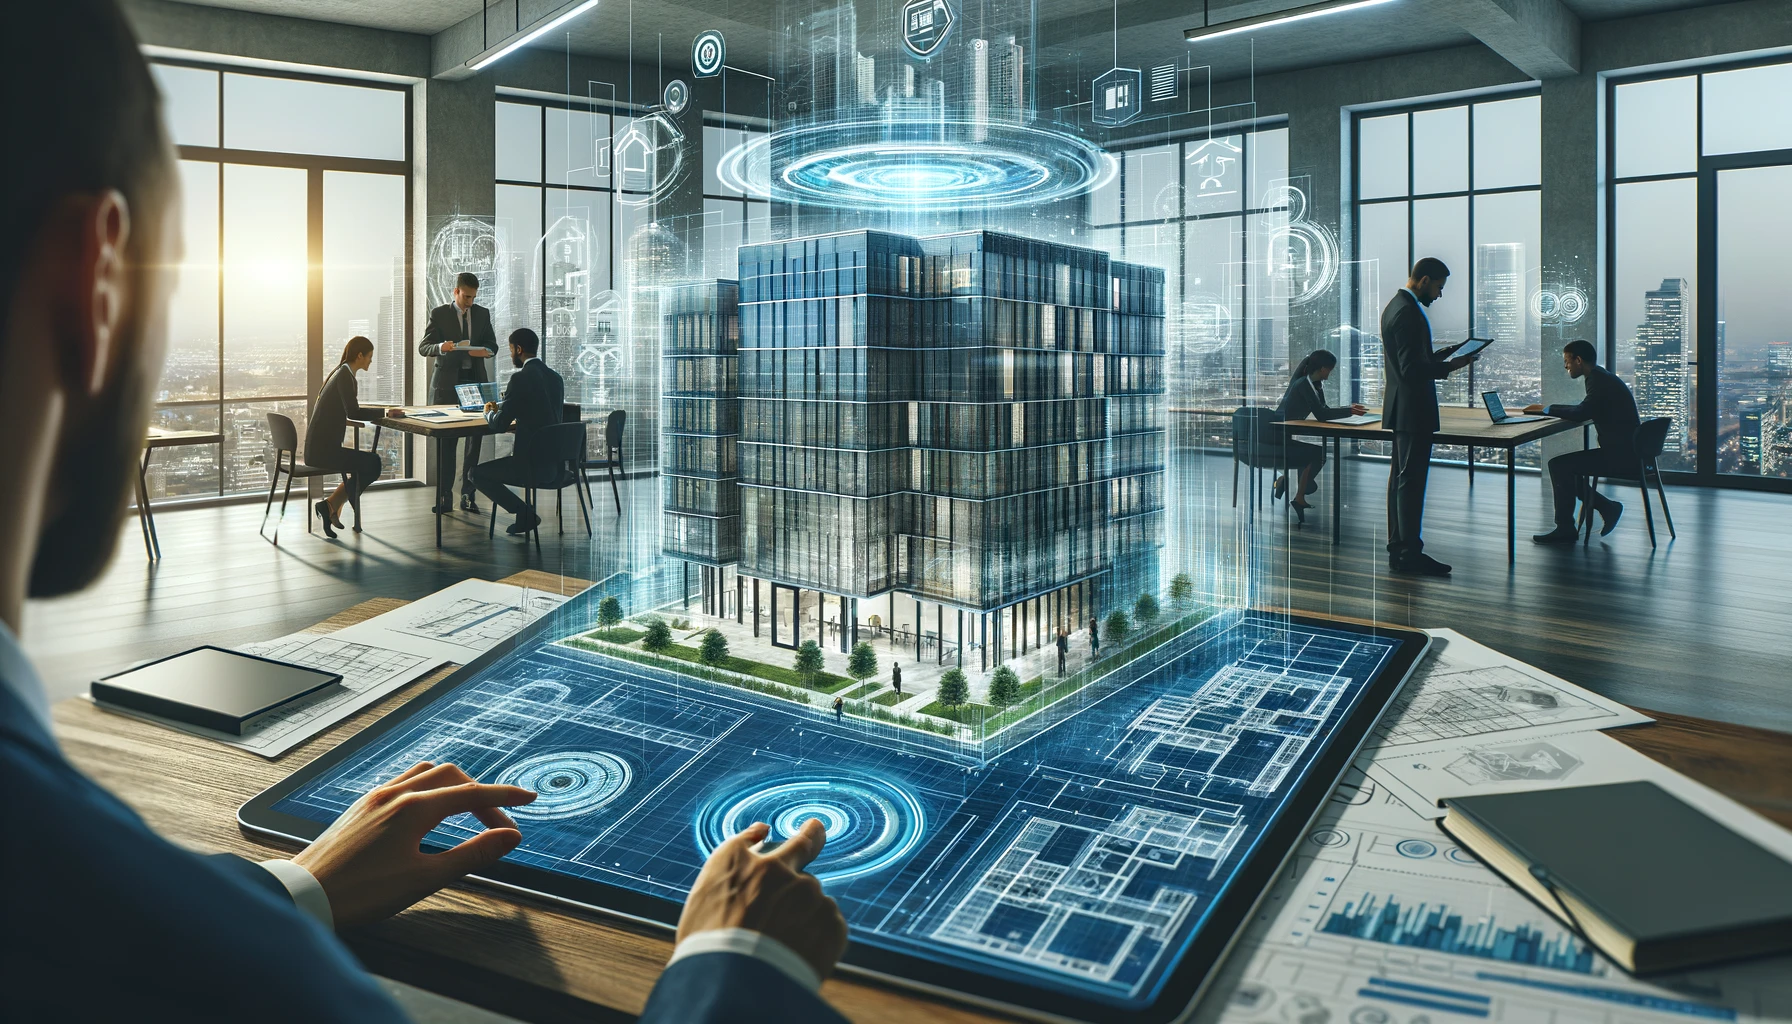 Here is the illustration for the article on how AI transforms pre-construction, depicting a modern architectural office with a holographic display of a building design. You can view and use the image from the preview above.